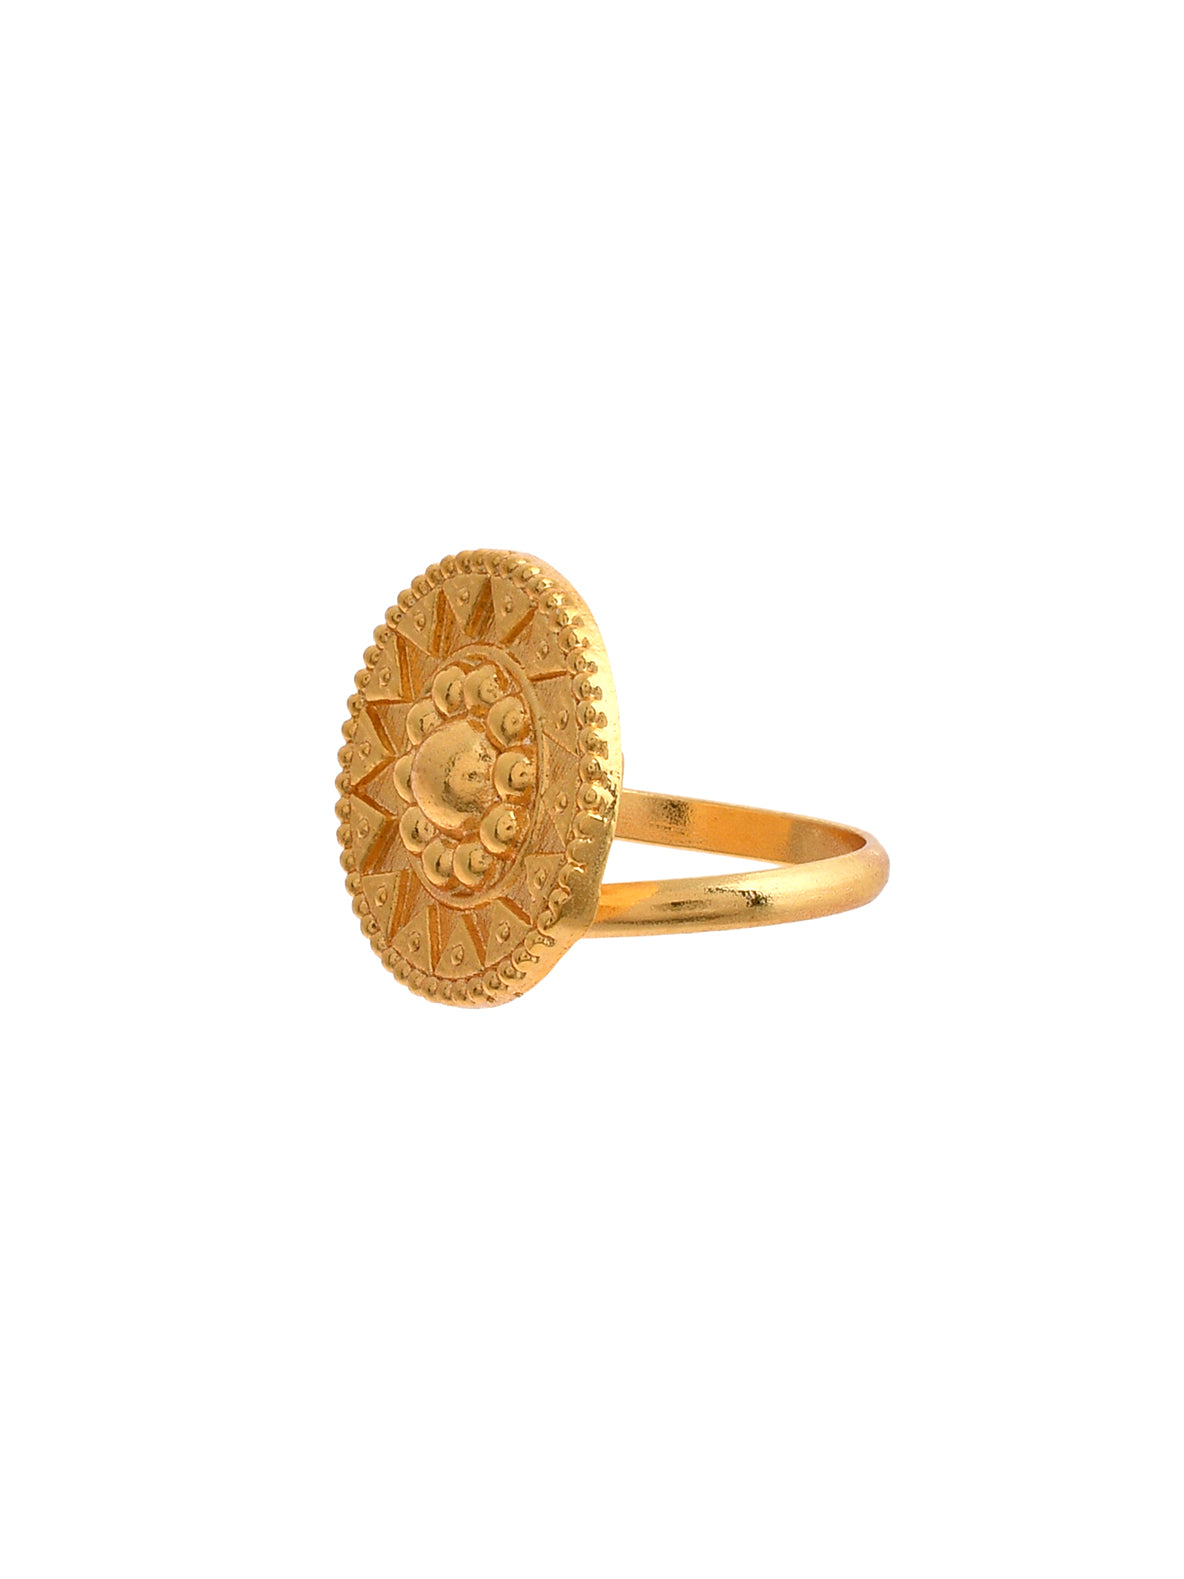 Gold Plated Handcrafted Temple Finger Ring